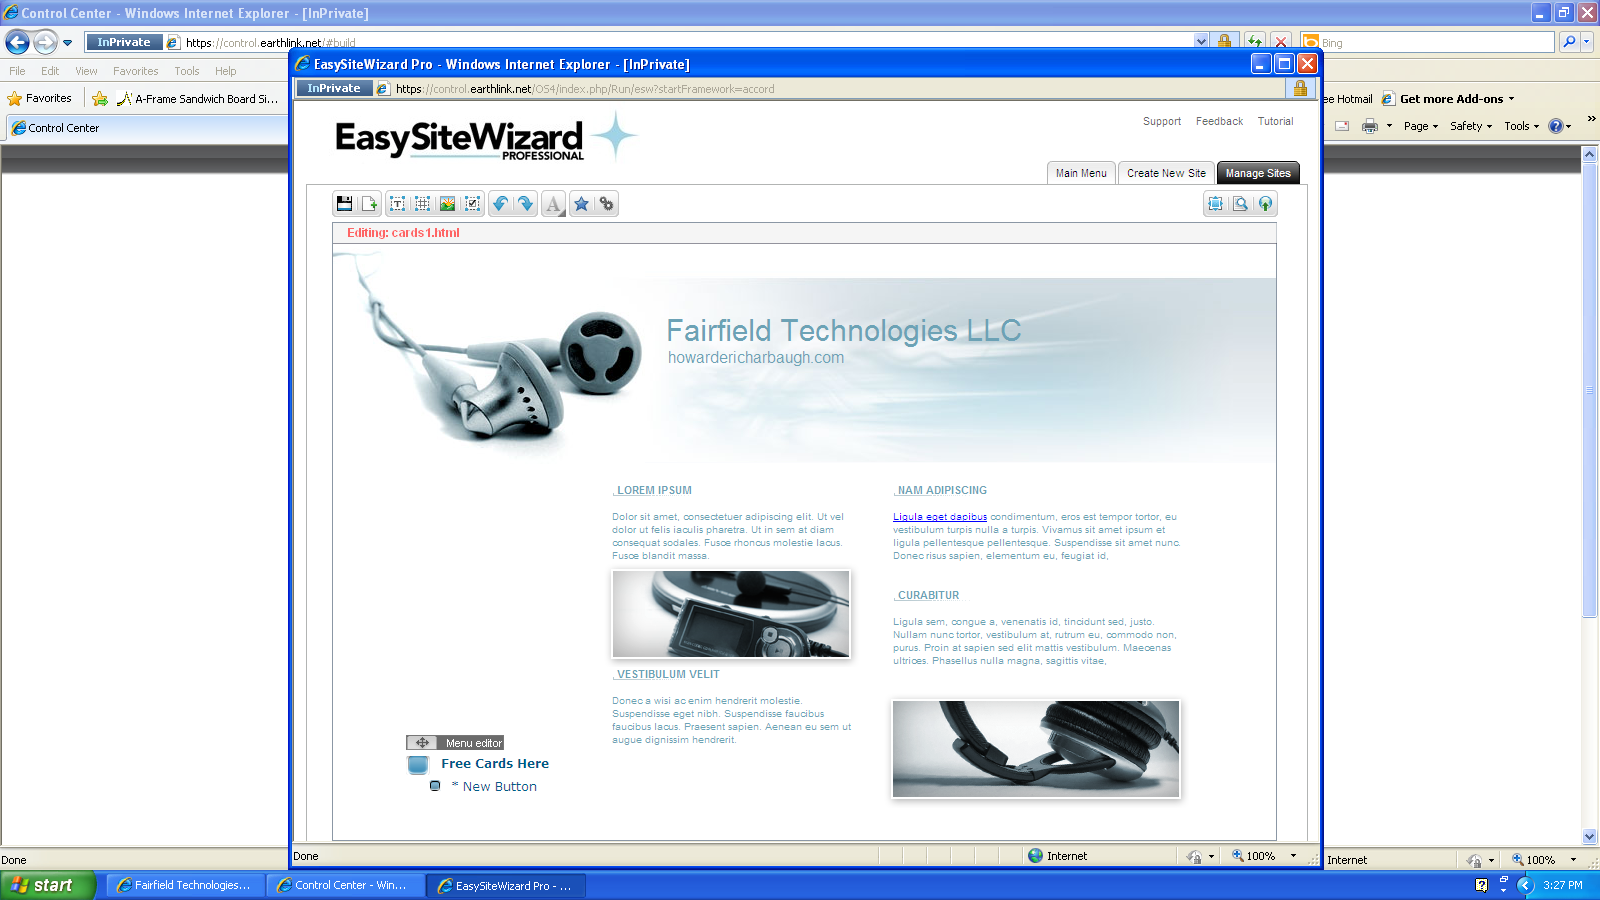 Some odd template kept fading in and out as I would develop the web site. I called it my Father and I's LCC, Fairfield Technologies LLC. Add a link and template shows up. I guess I'm stupid and don't 